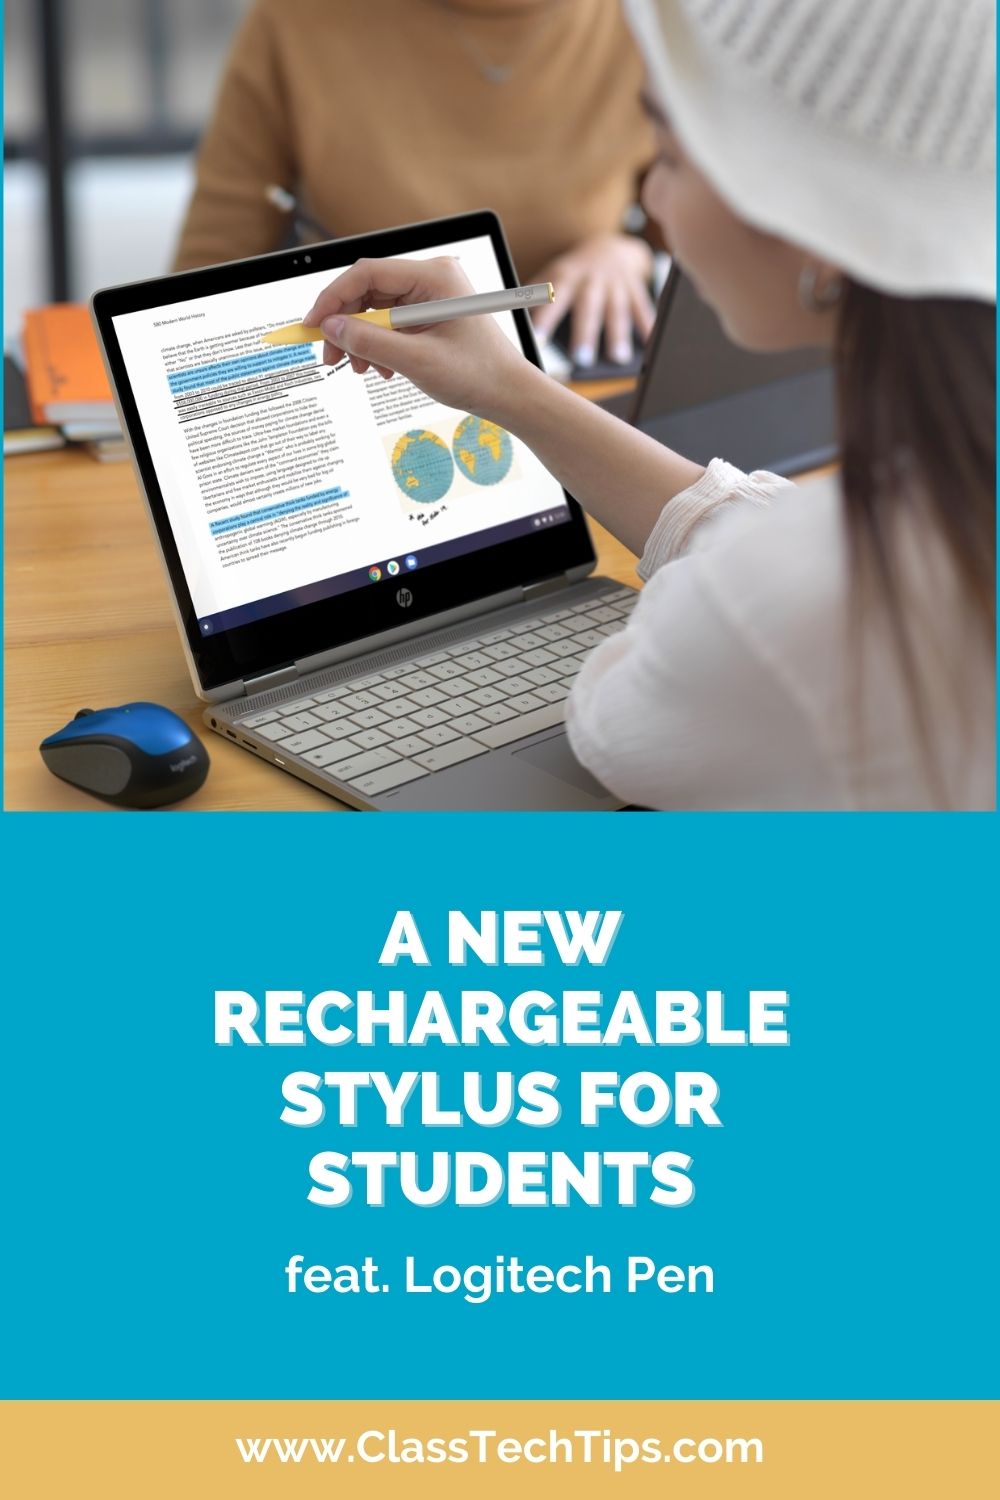 If you’re looking for a rechargeable stylus for students, the new Logitech Pen is designed specifically for classroom use for any subject.